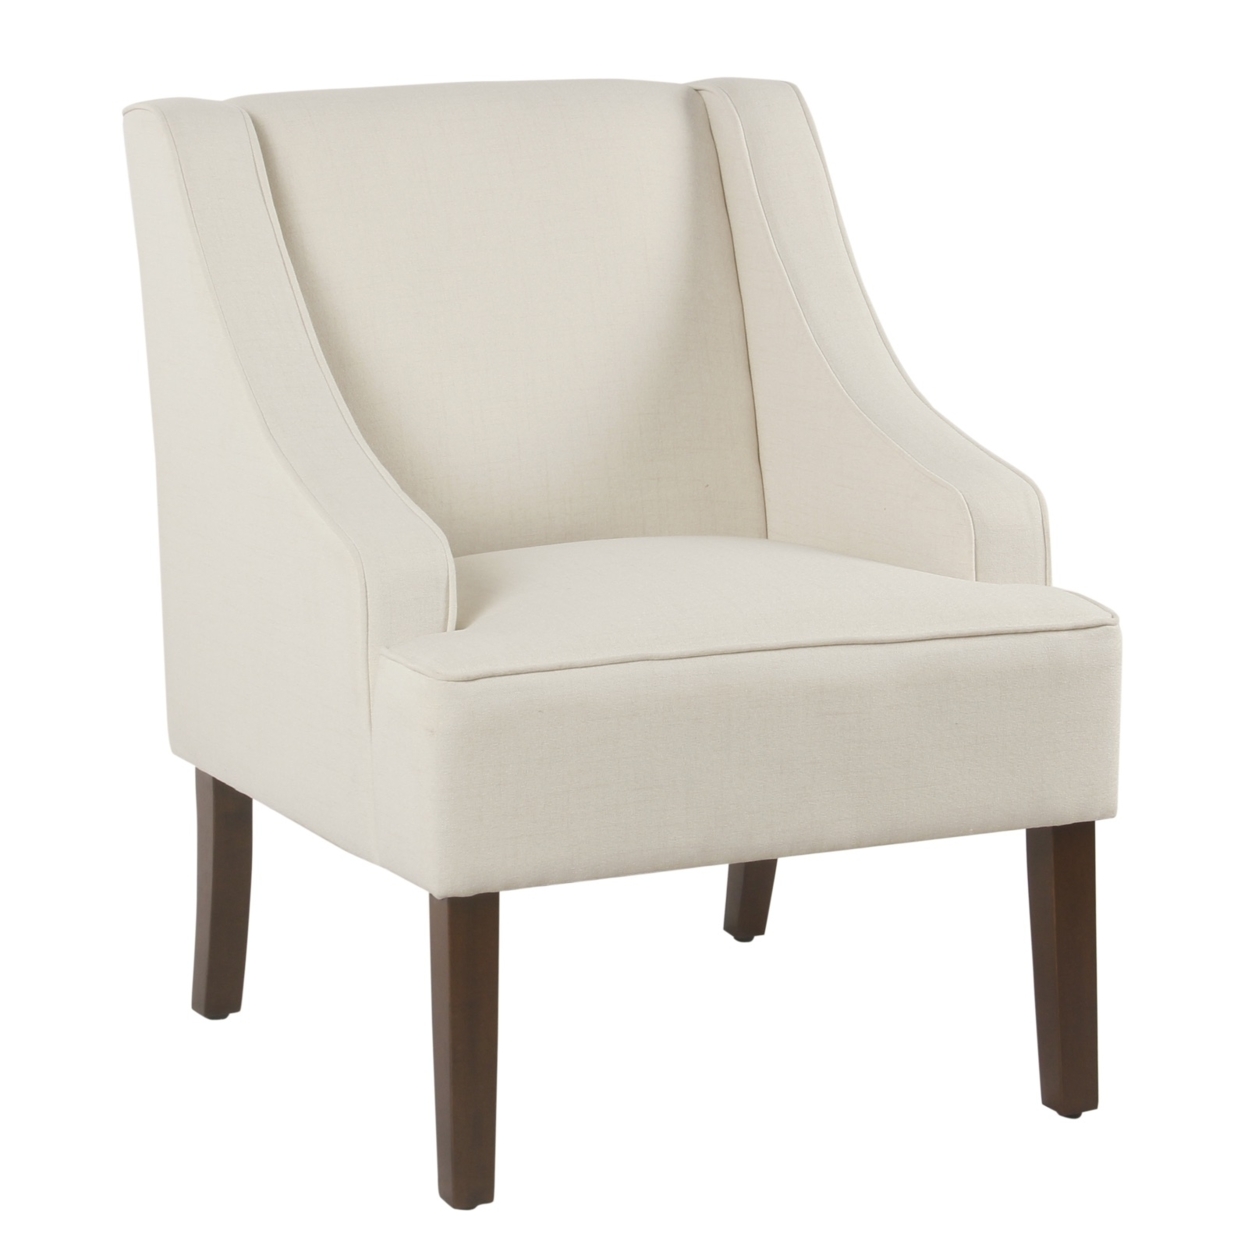 Fabric Upholstered Wooden Accent Chair With Swooping Armrests, Cream And Brown- Saltoro Sherpi